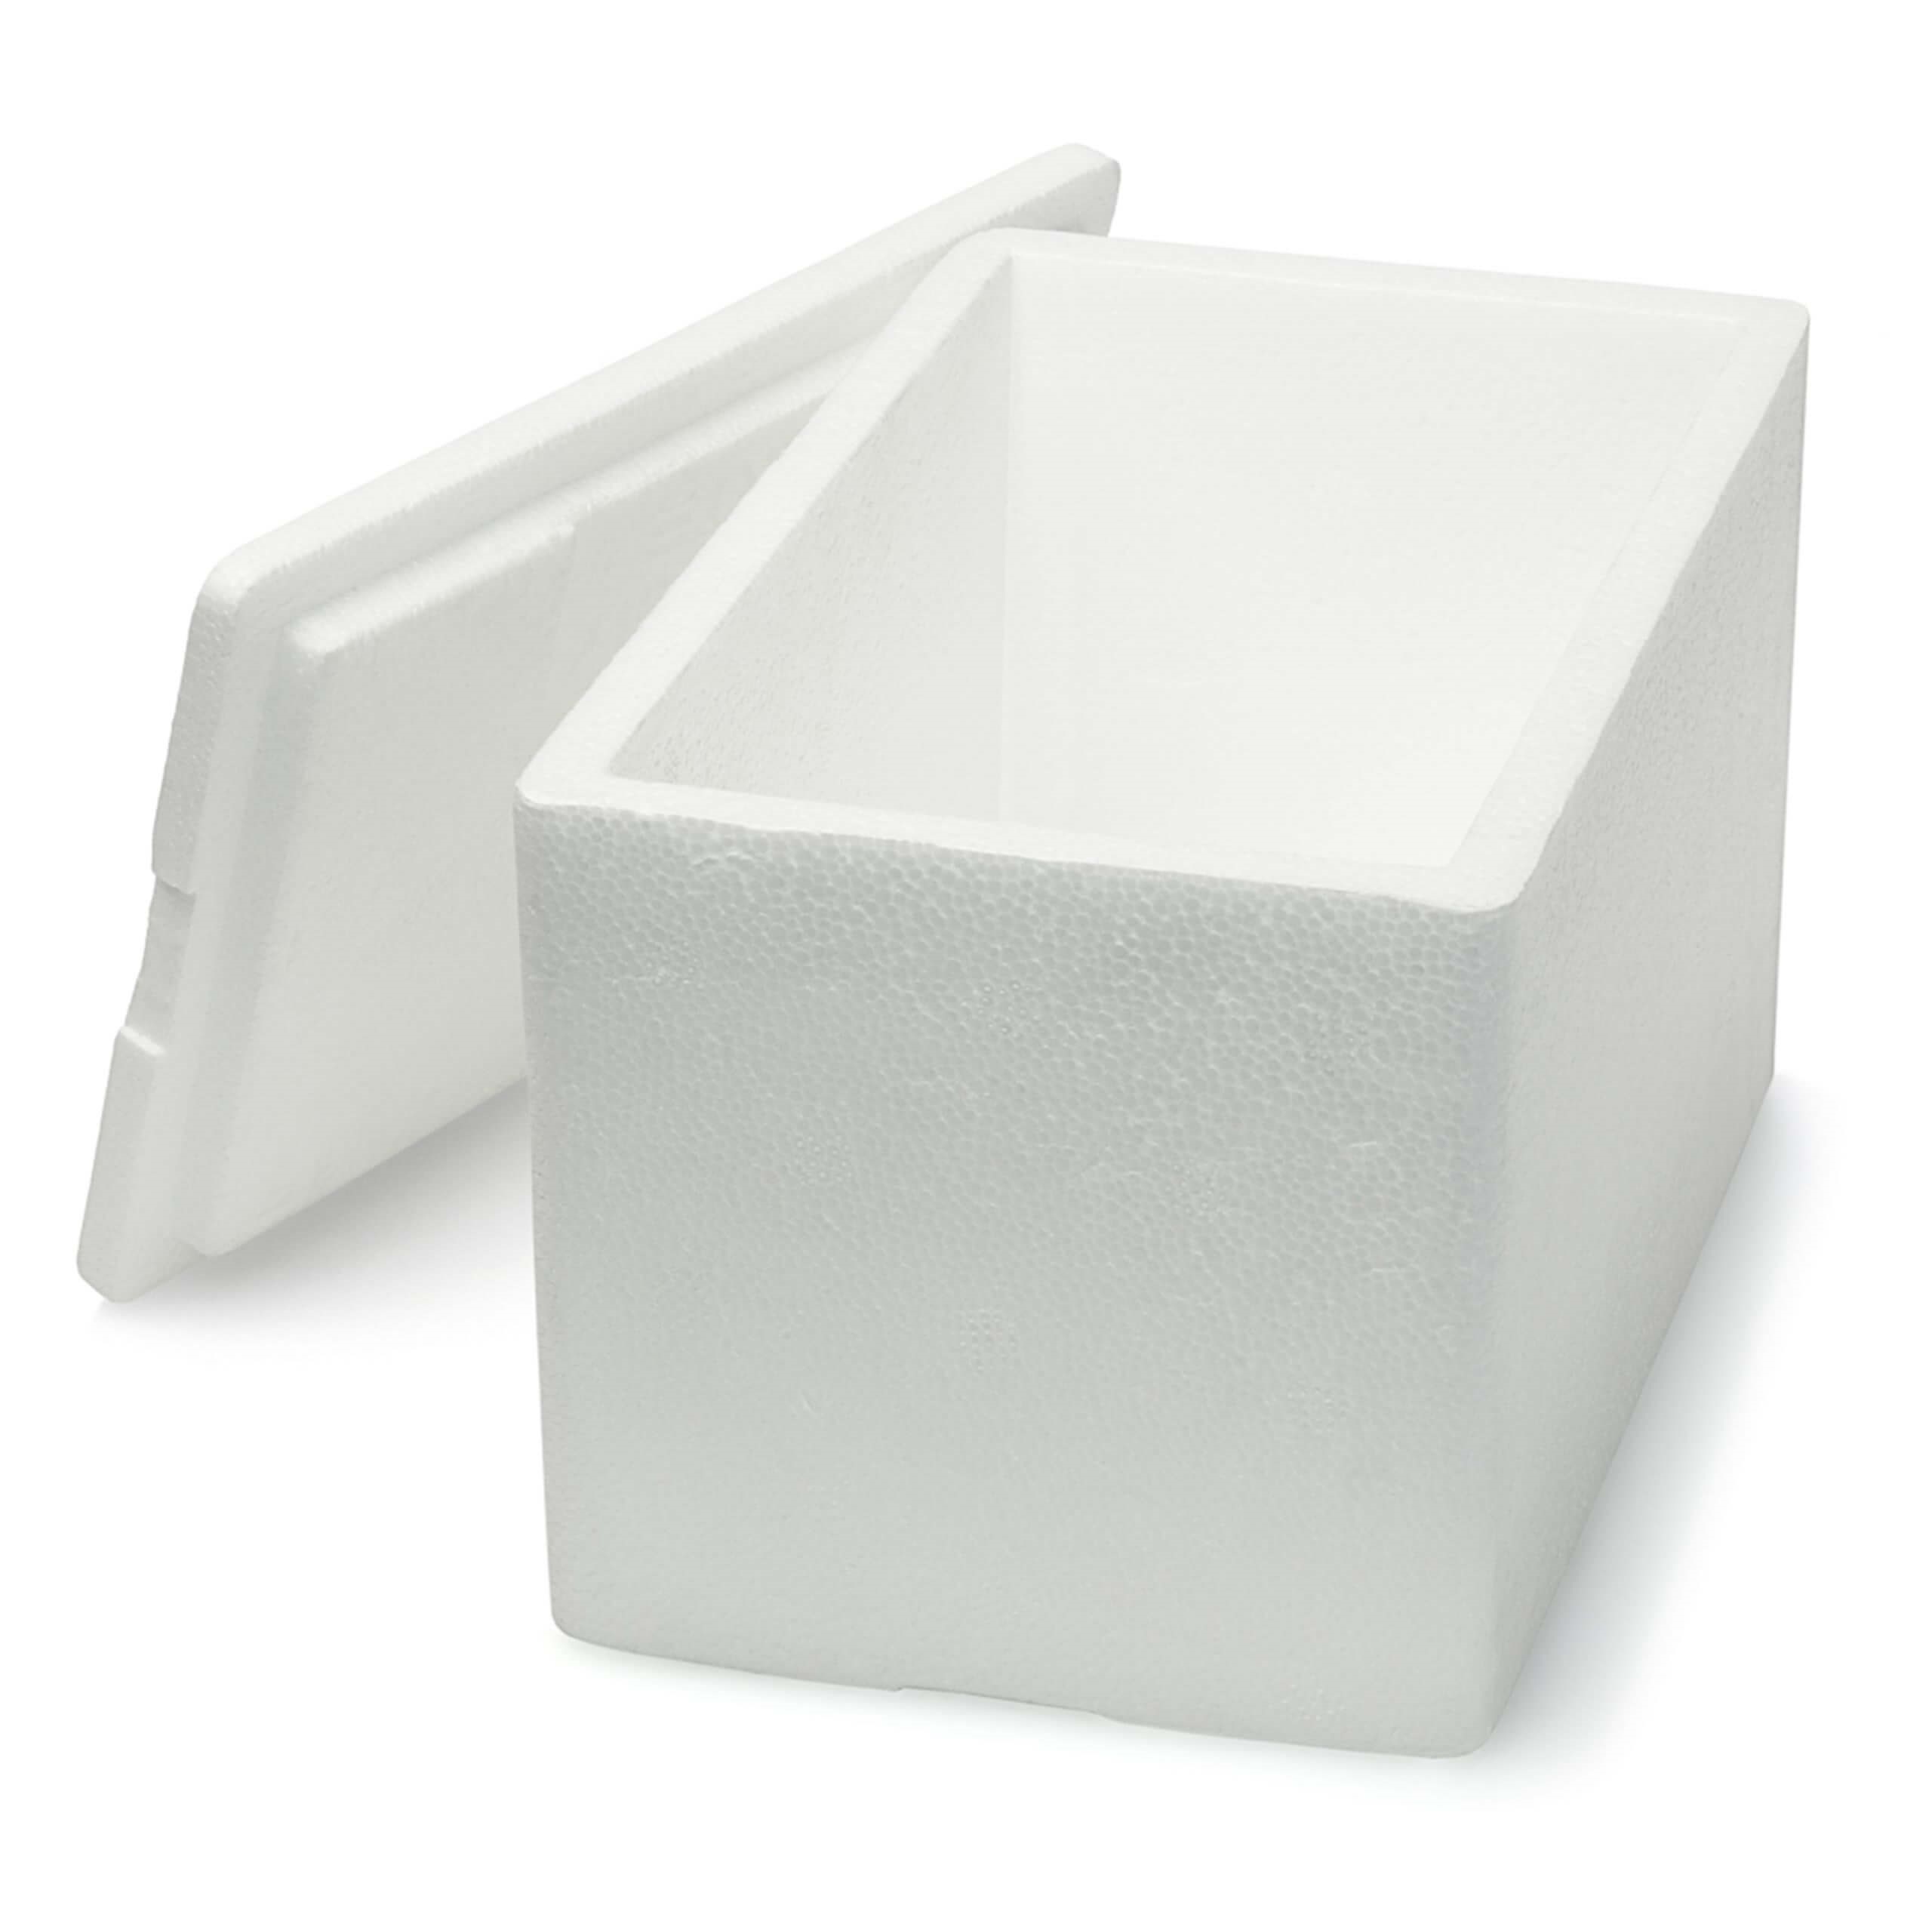 An image of a polystyrene cooler box.